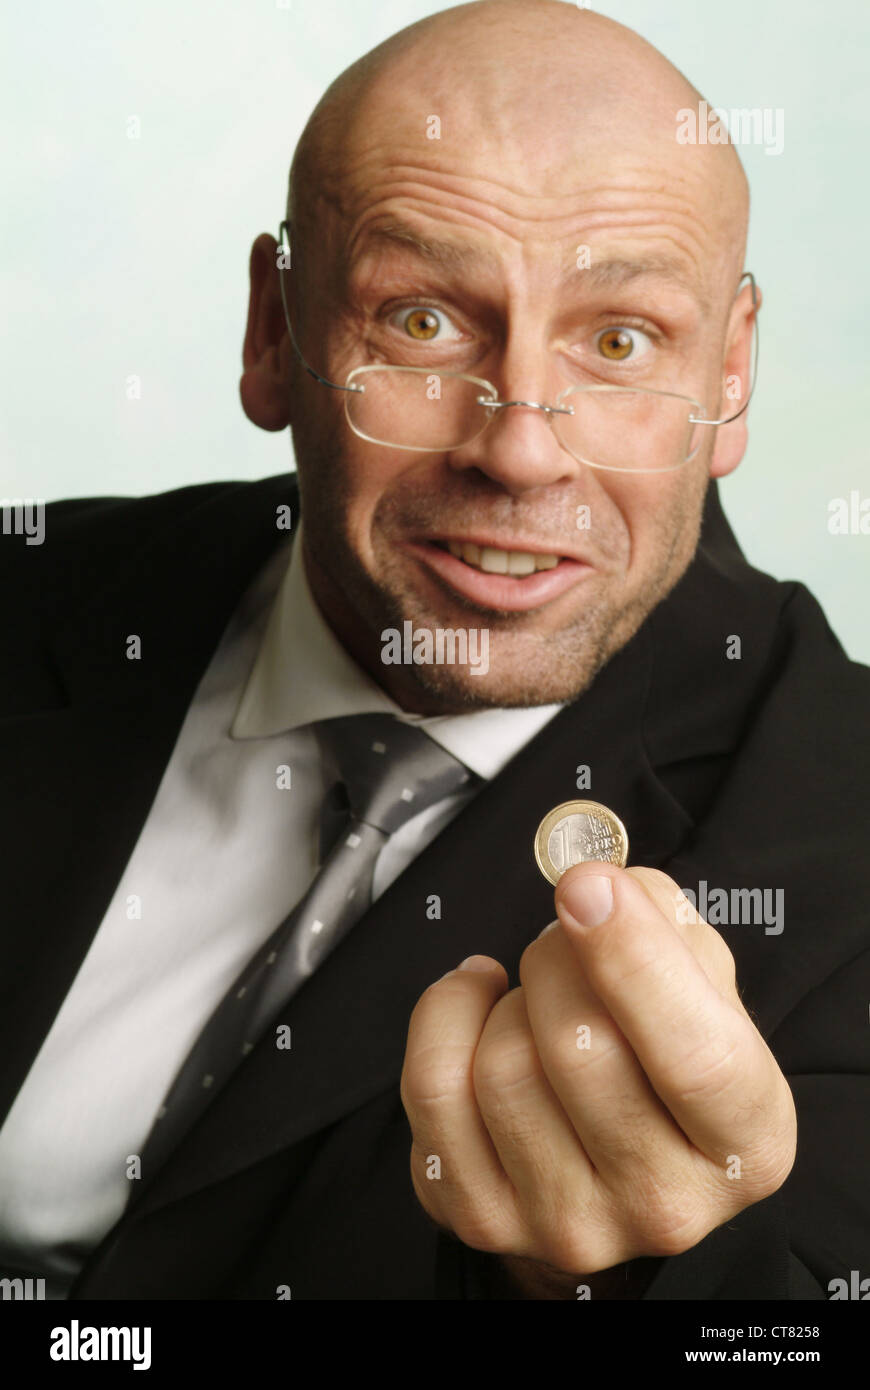 Man with 1-euro piece in hand Stock Photo